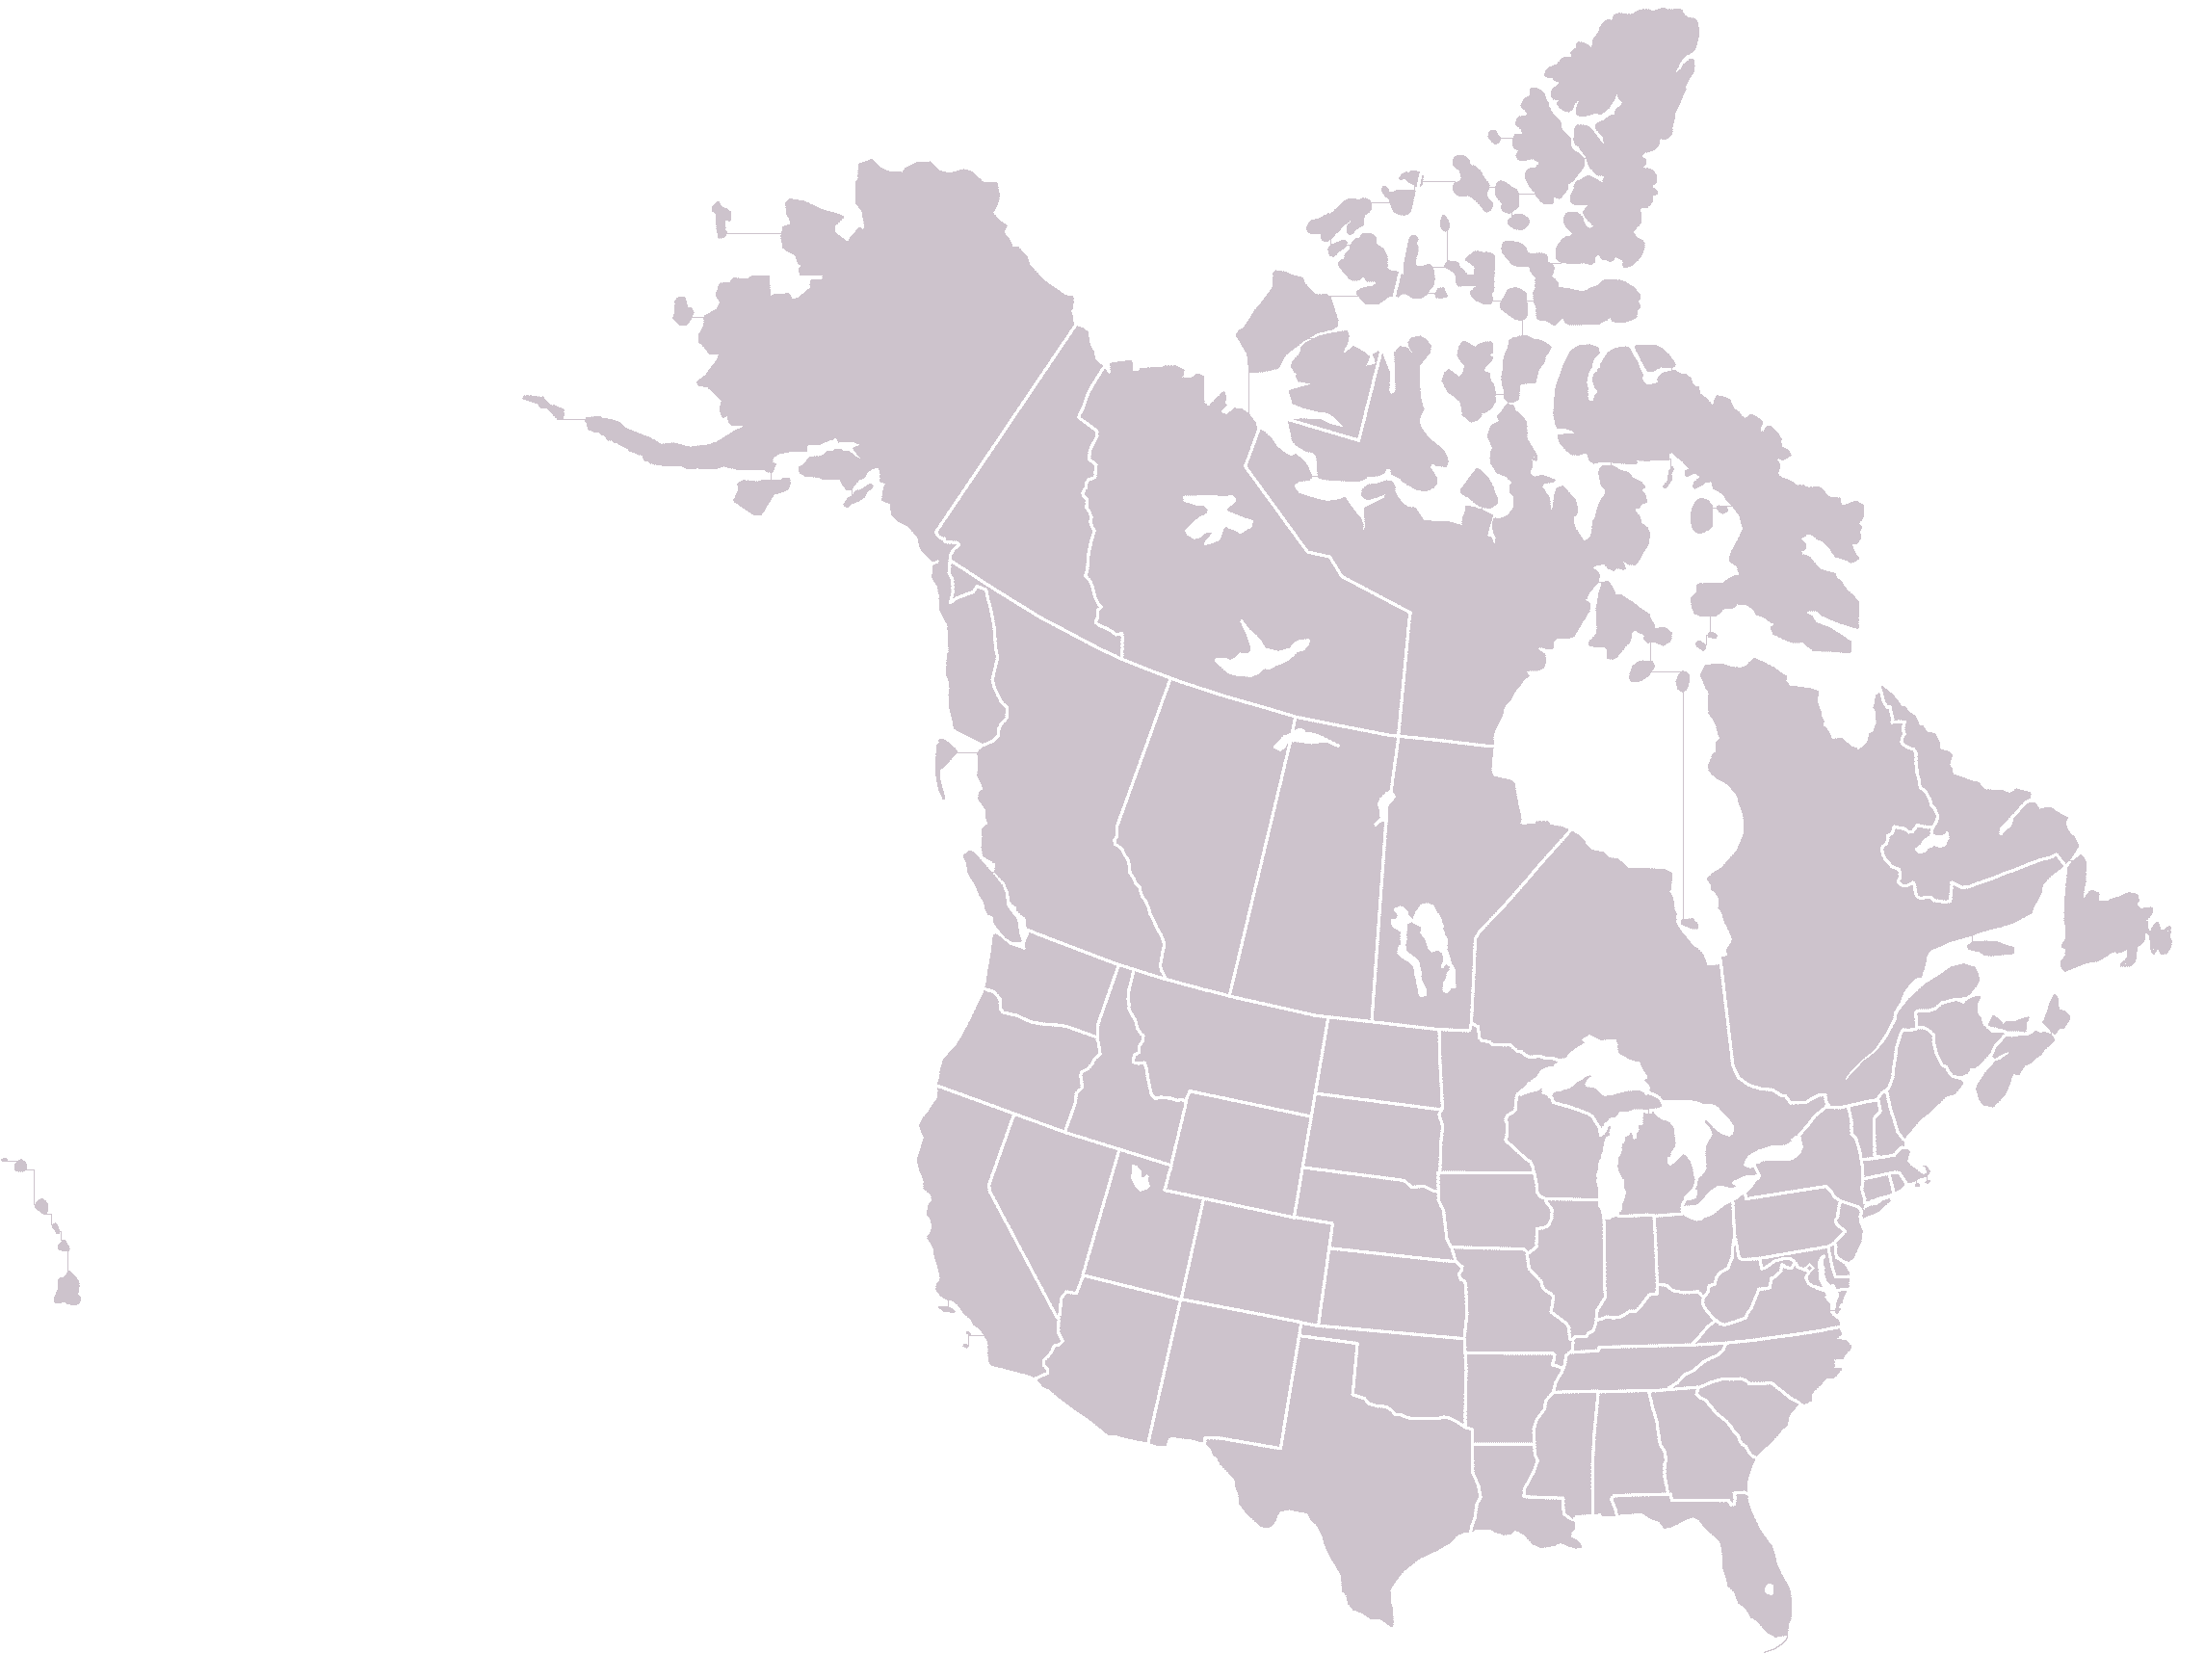 Map Of Us And Canada States